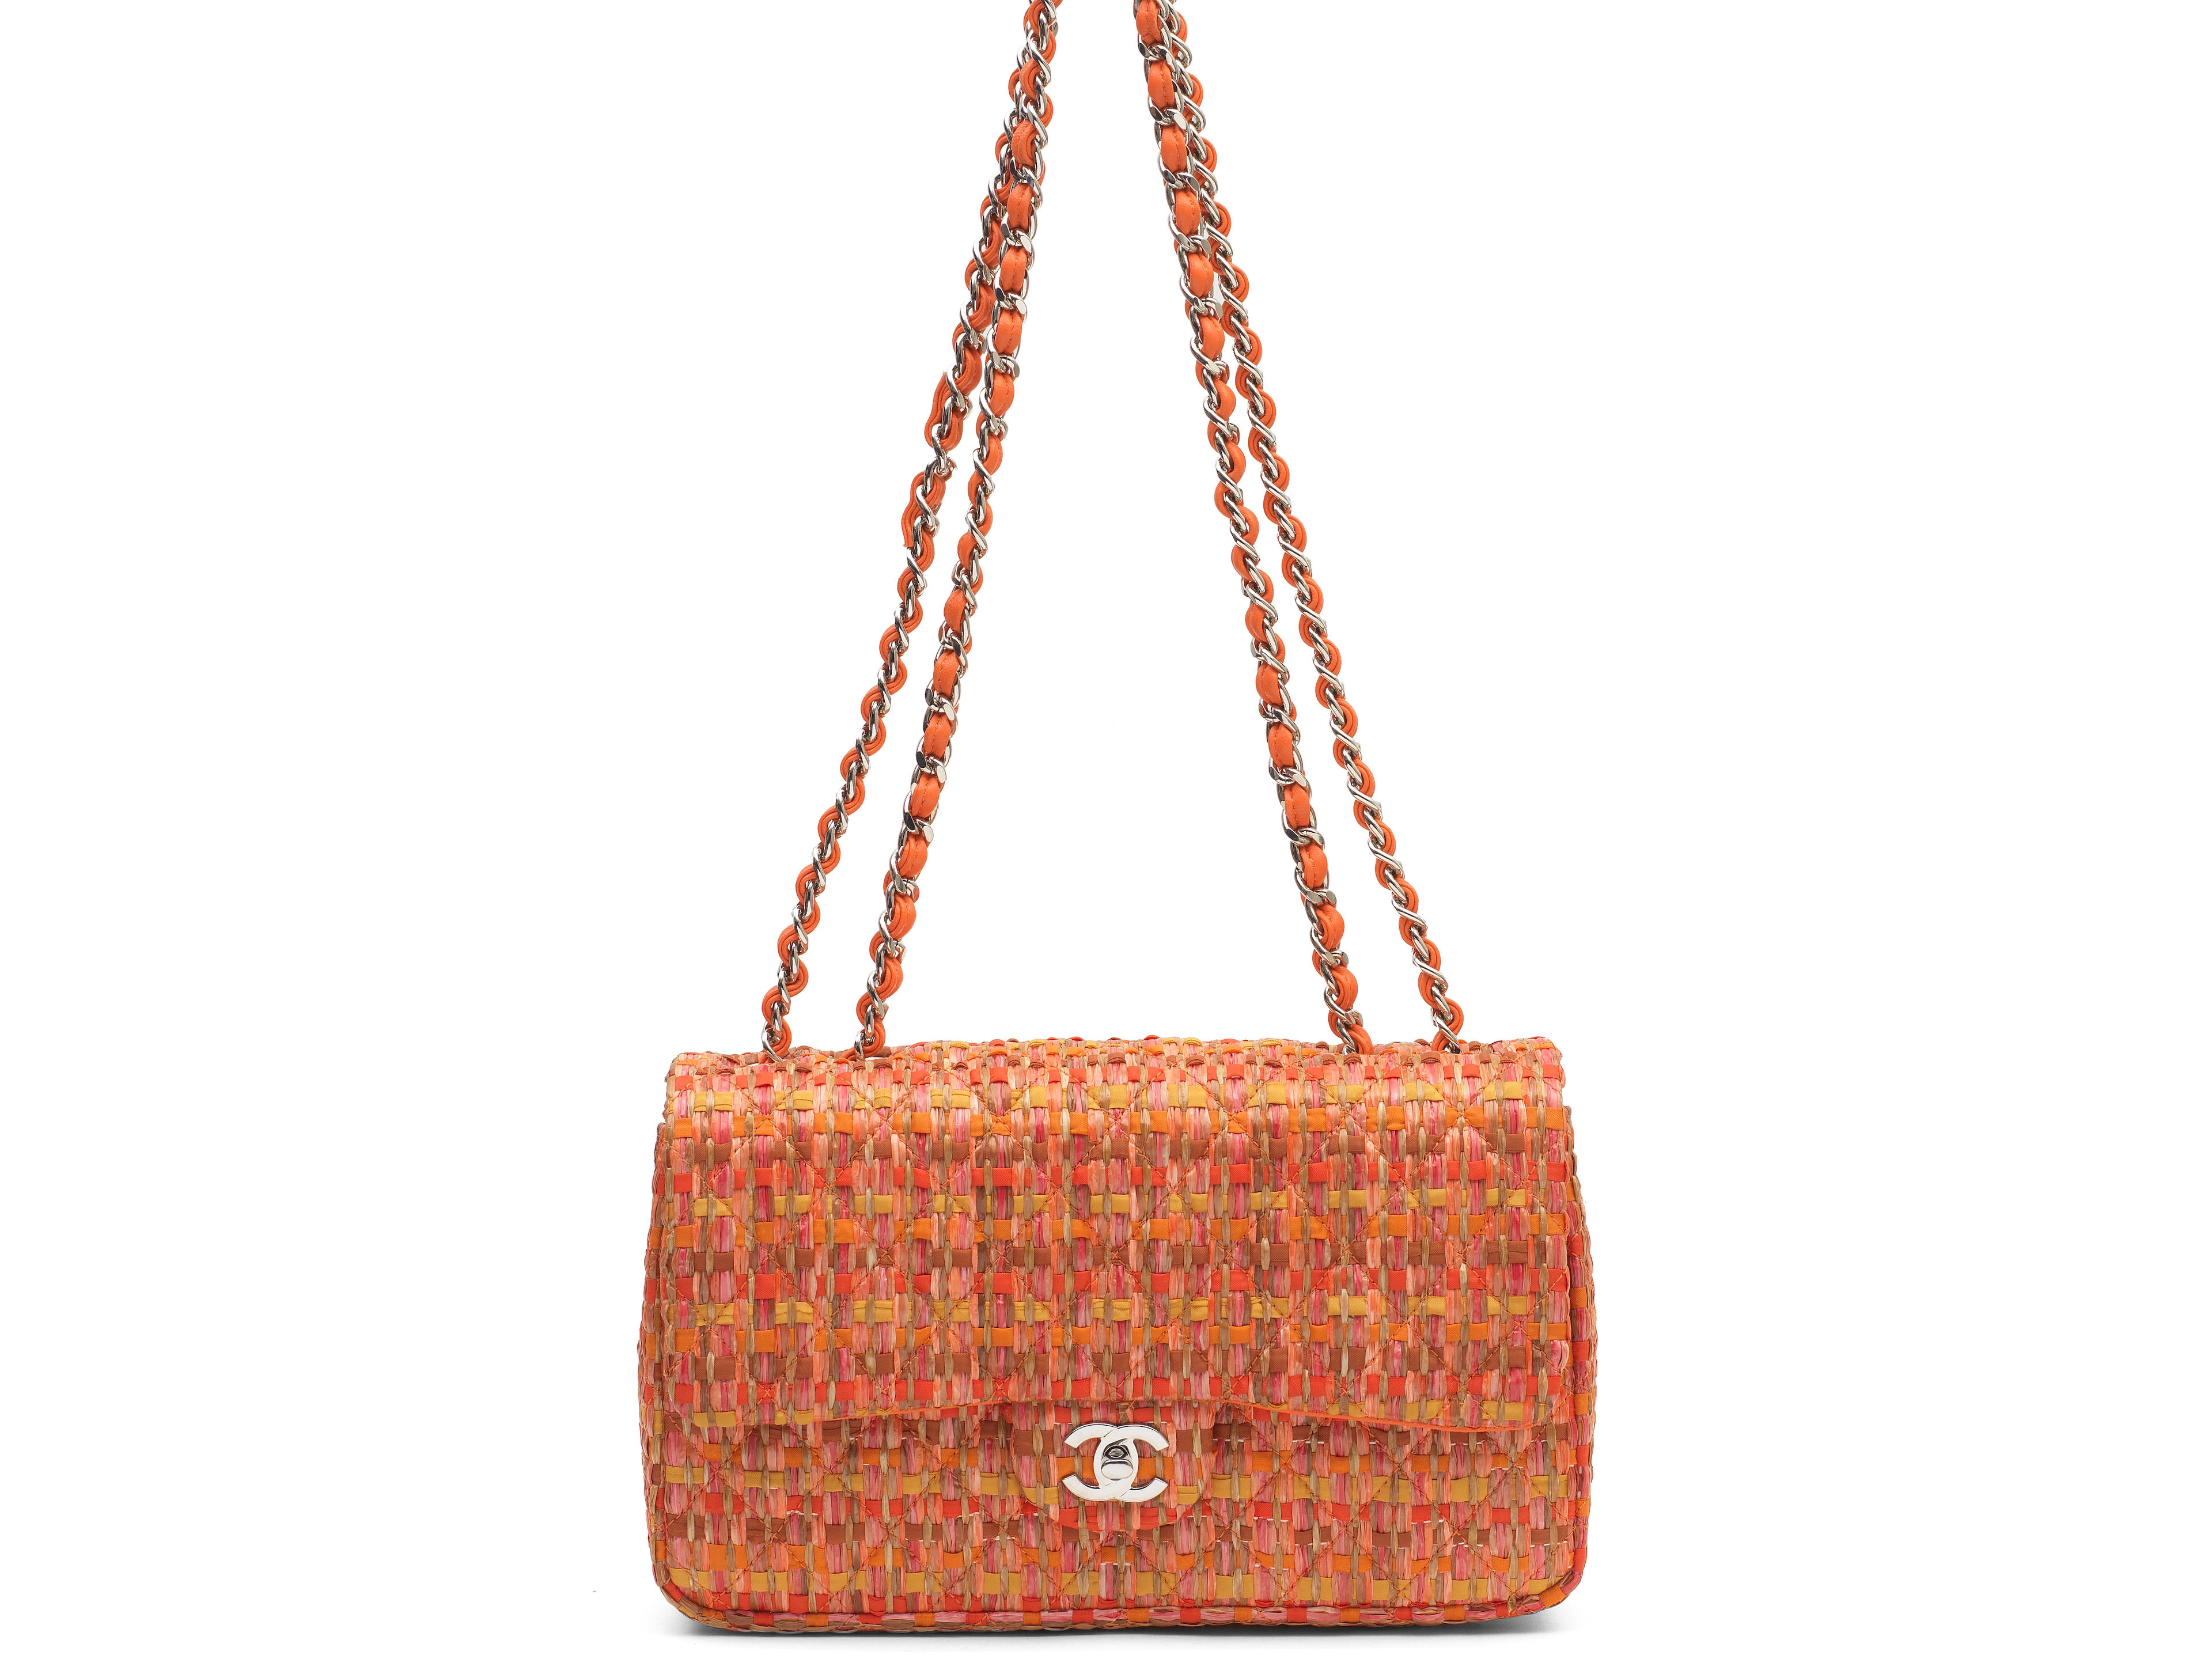 AN ORANGE WOVEN RAFFIA FLAP BAG Chanel, 2003-04 (includes authenticity card, dust bag and box, no serial code)